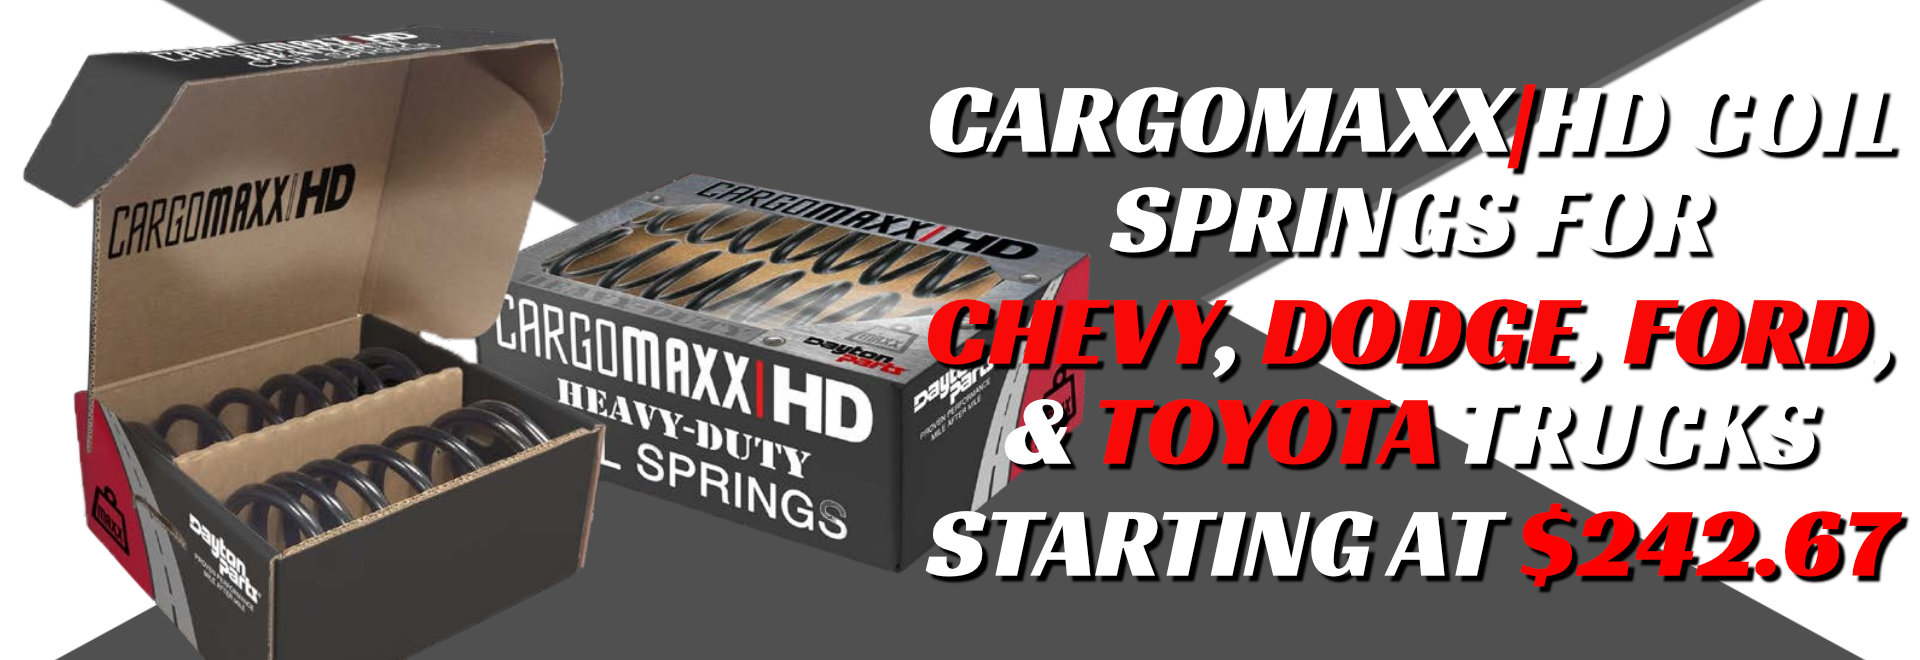 Cargomaxx HD Coil Sprins for Chevy, Dodge, Ford, & Toyota Trucks starting at $242.67